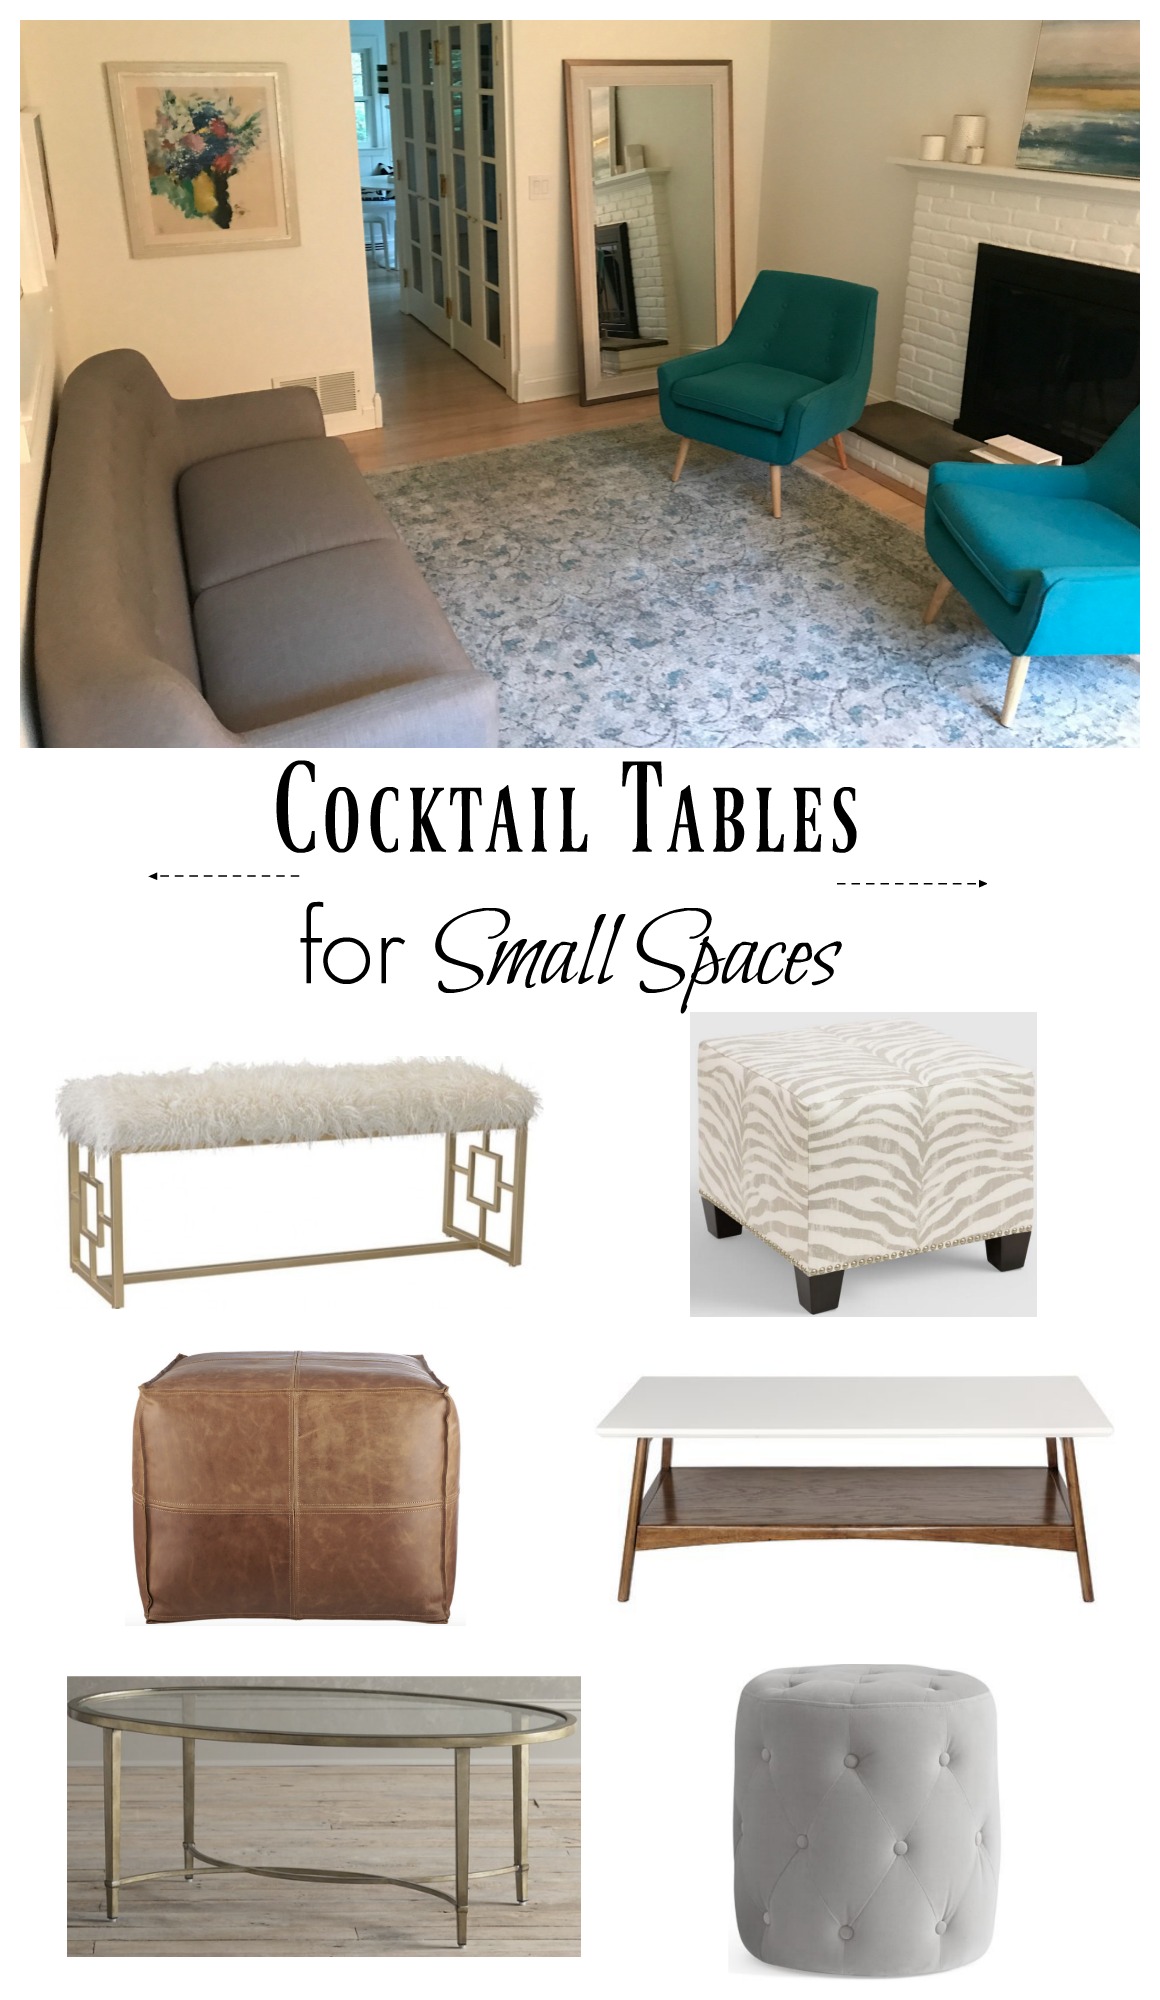 Cocktail Table Ideas for Small Spaces